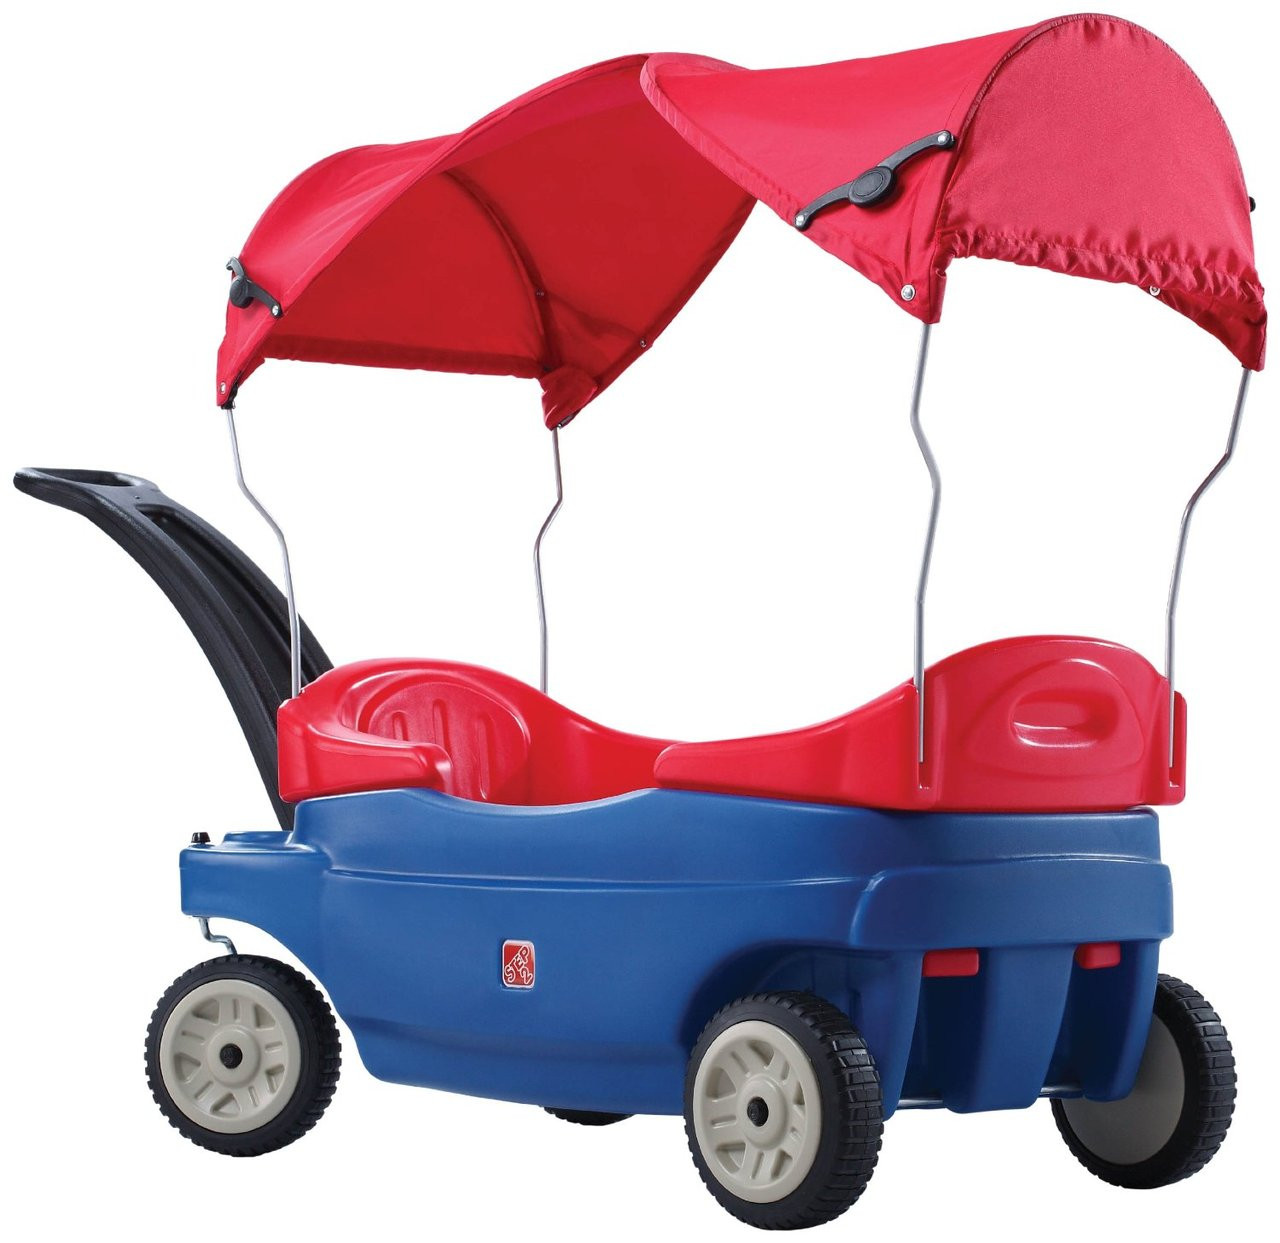 Step2 Versa Seat Wagon with Canopy - For Moms